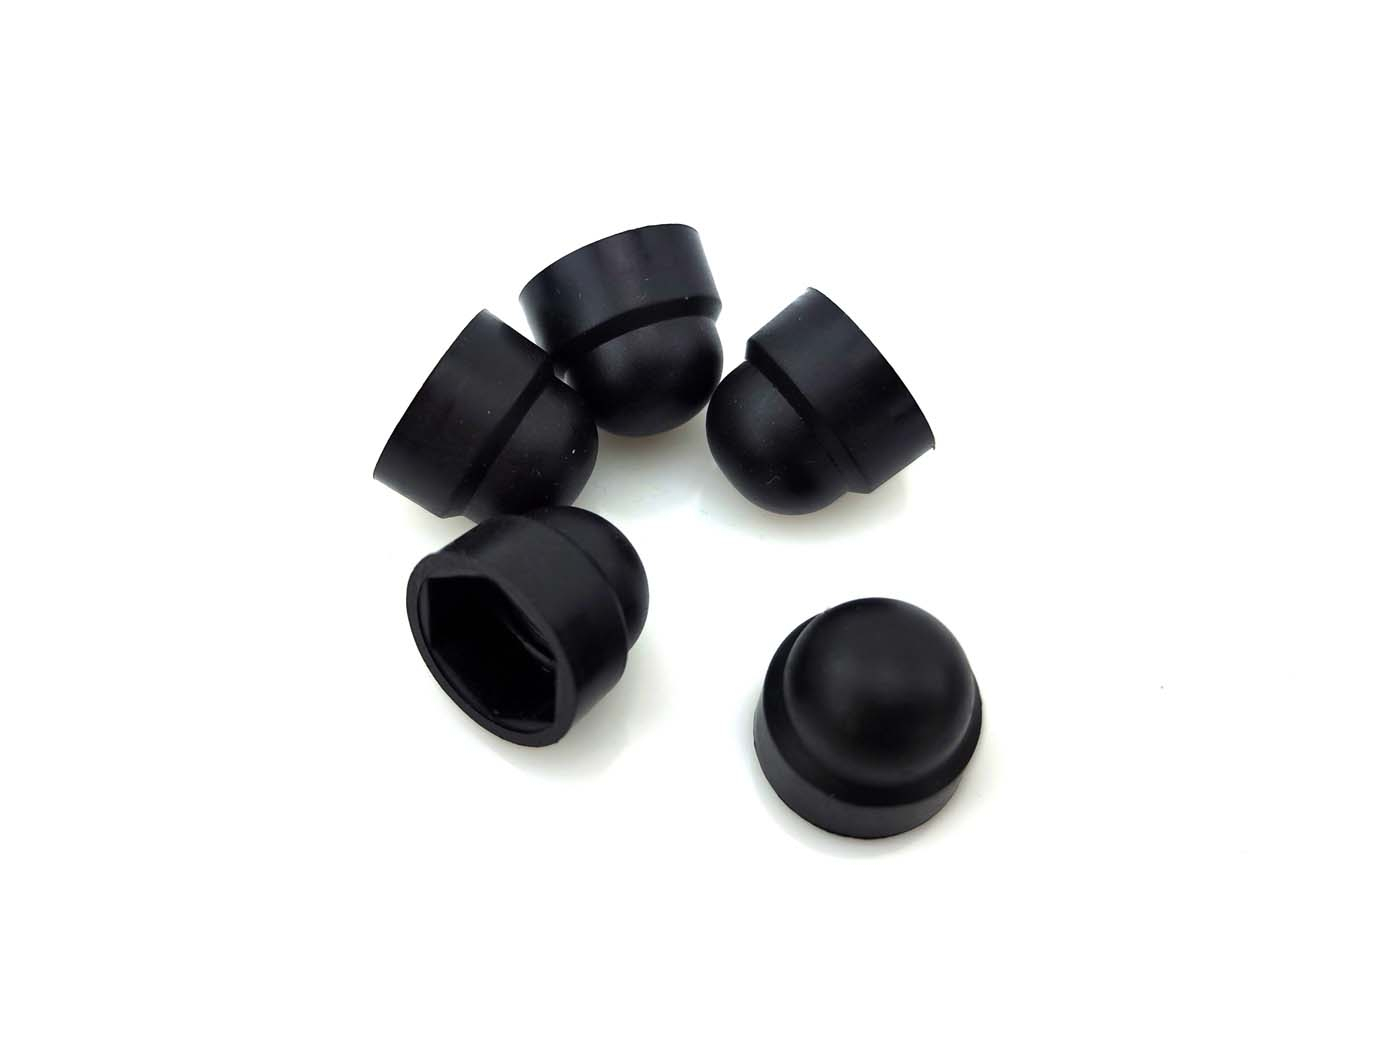 Nuts Caps 5 Pieces Black For M8 Screws Wrench Size 13mm For Moped Mokick